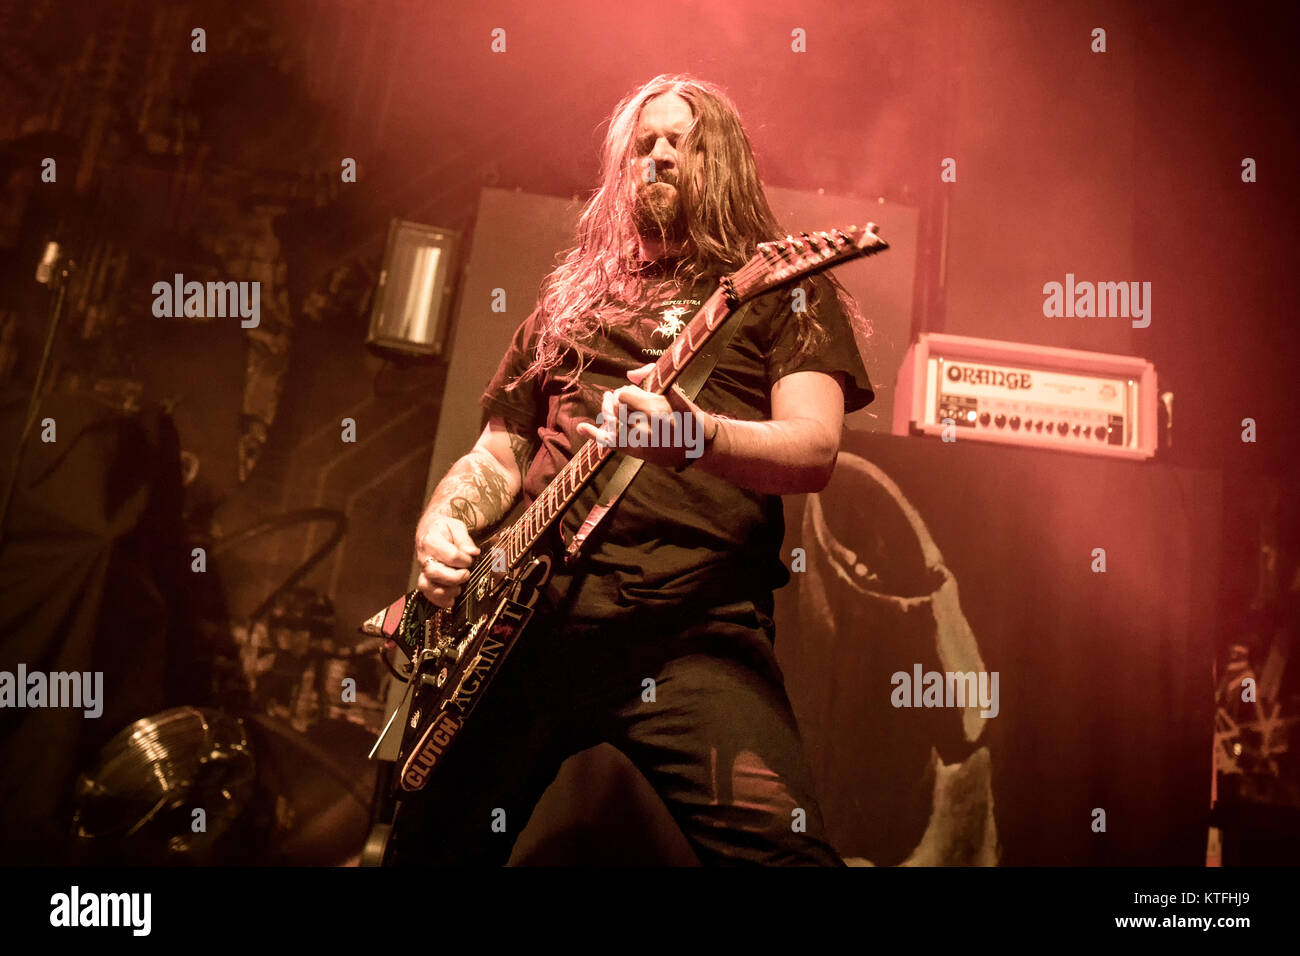 The Brazilian death and thrash metal band Sepultura performs a live concert at Rockefeller in Oslo. Here vocalist guitarist Andreas Kisser is seen live on stage. Denmark, 07/02 2017. Stock Photo